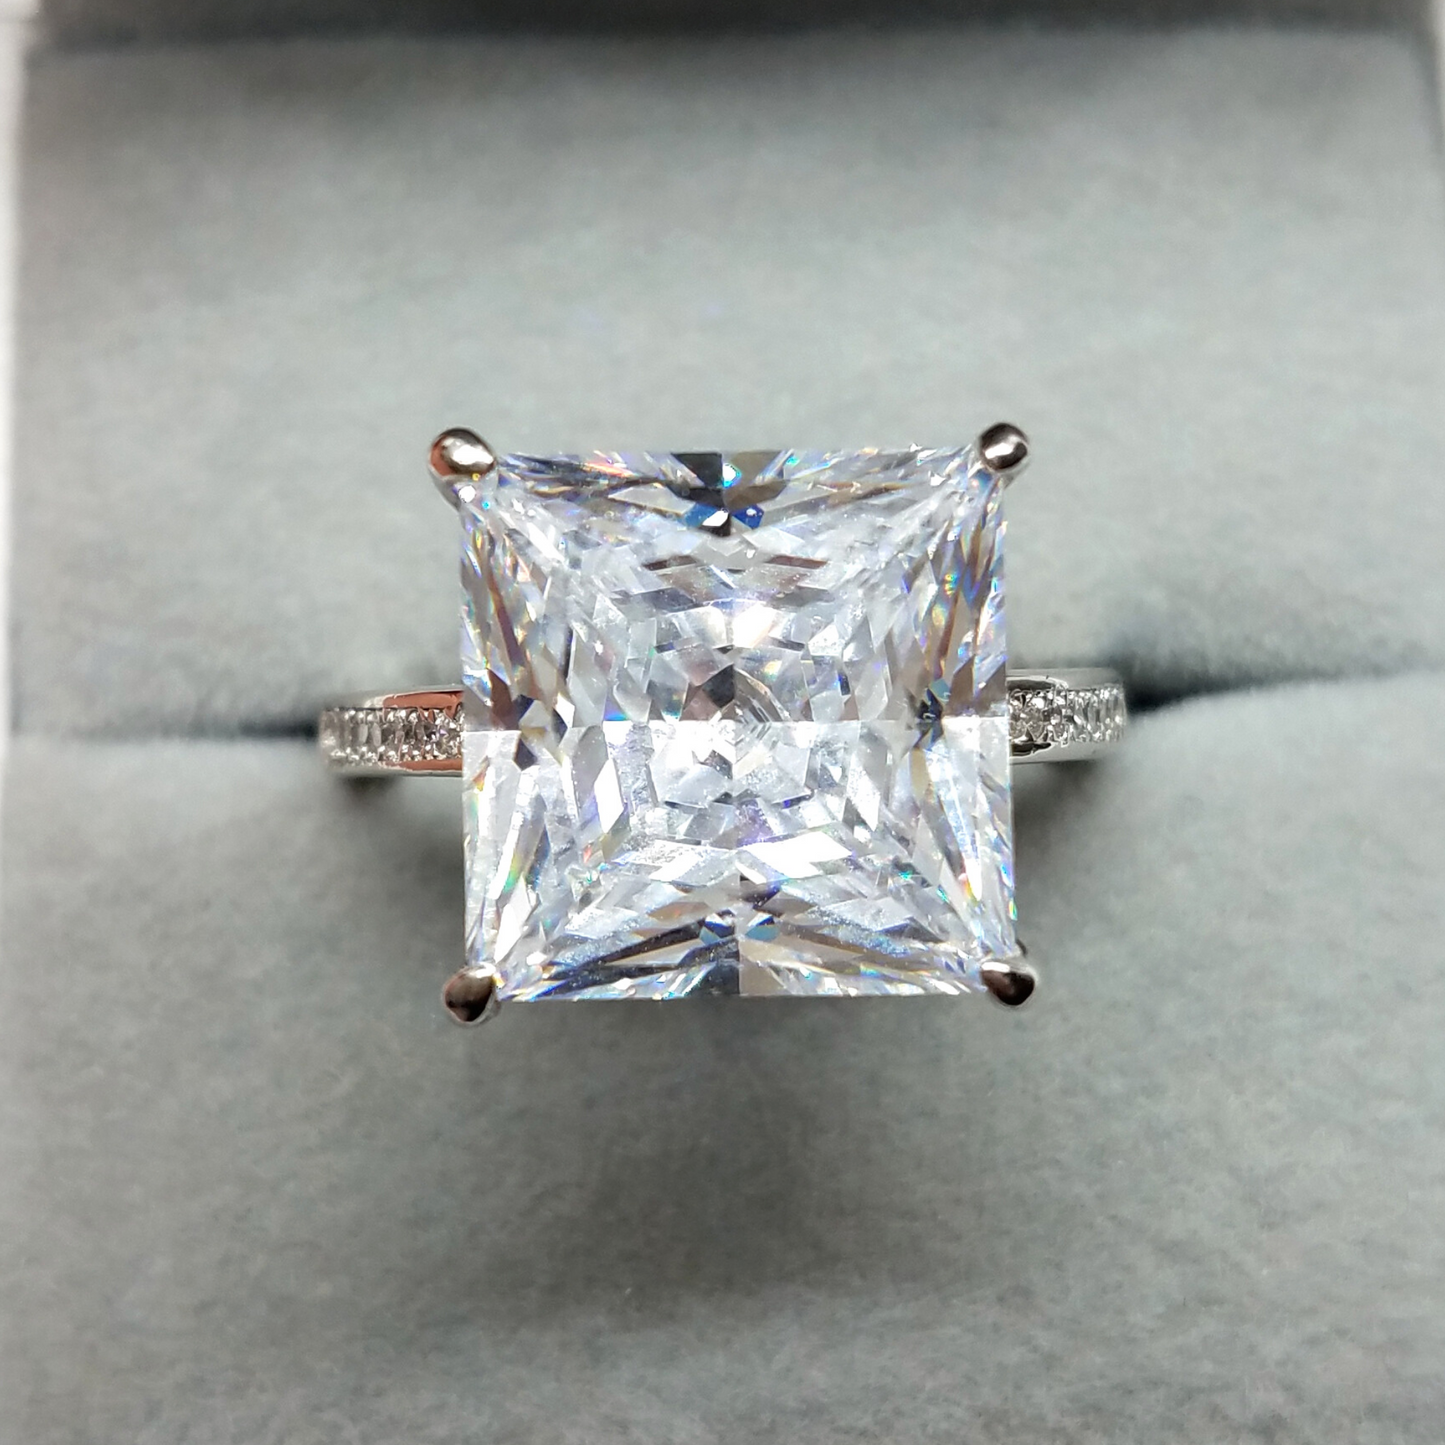 Barcelona 14K White Gold Over Sterling Silver 9.5 Ct Princess Cut Cz for Women Special Occasion Wedding Engagement Ring